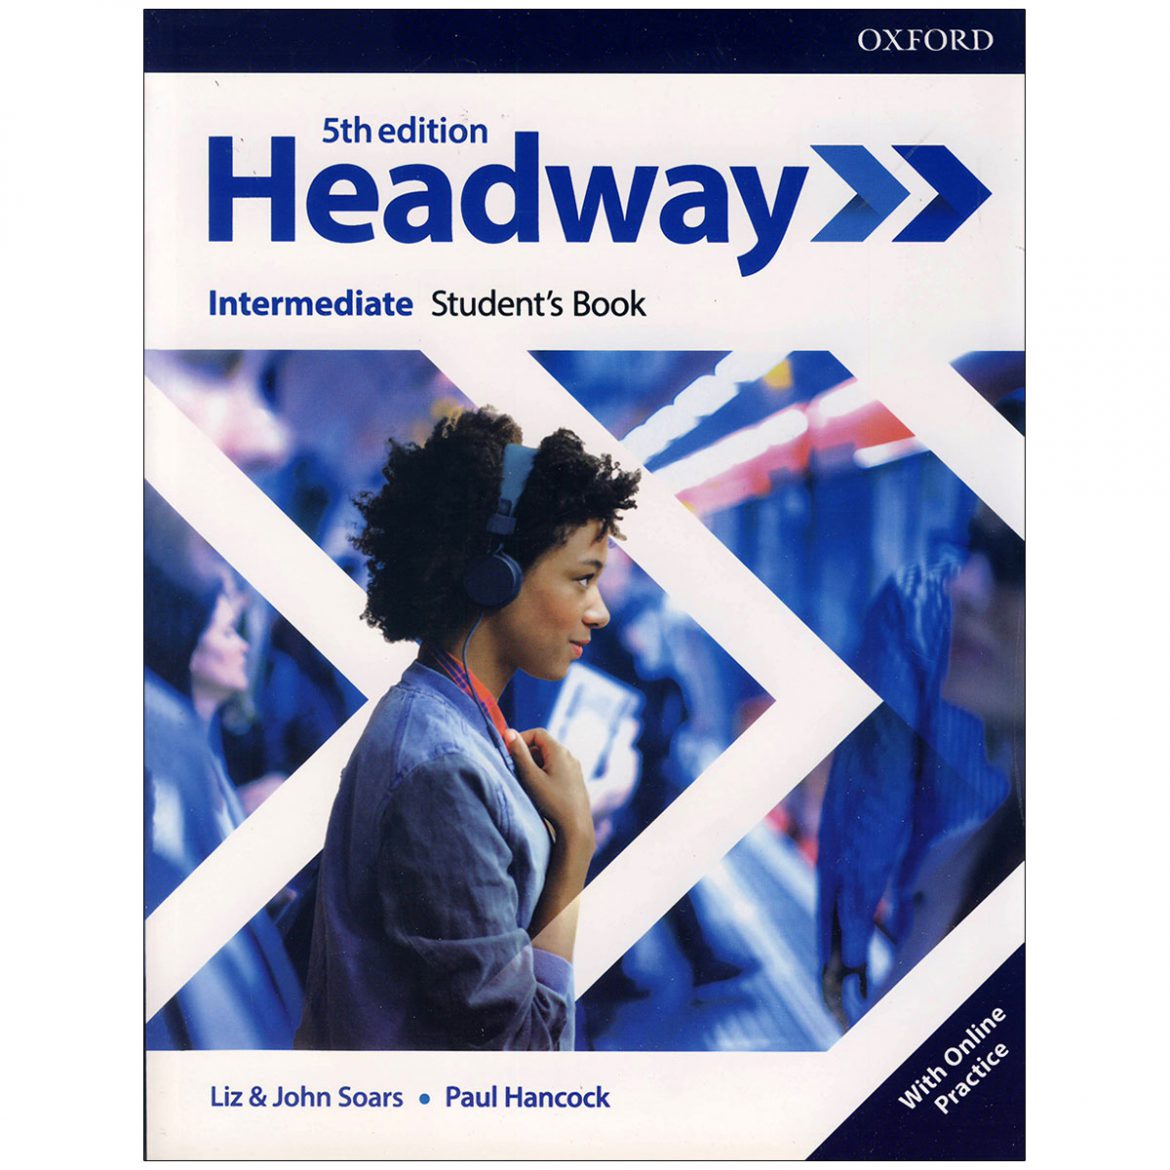 Headway teacher book intermediate. Headway books 5th Edition. Headway 5th Edition students book. Headway 5 Workbook. Headway Intermediate student's book Fifth Edition.